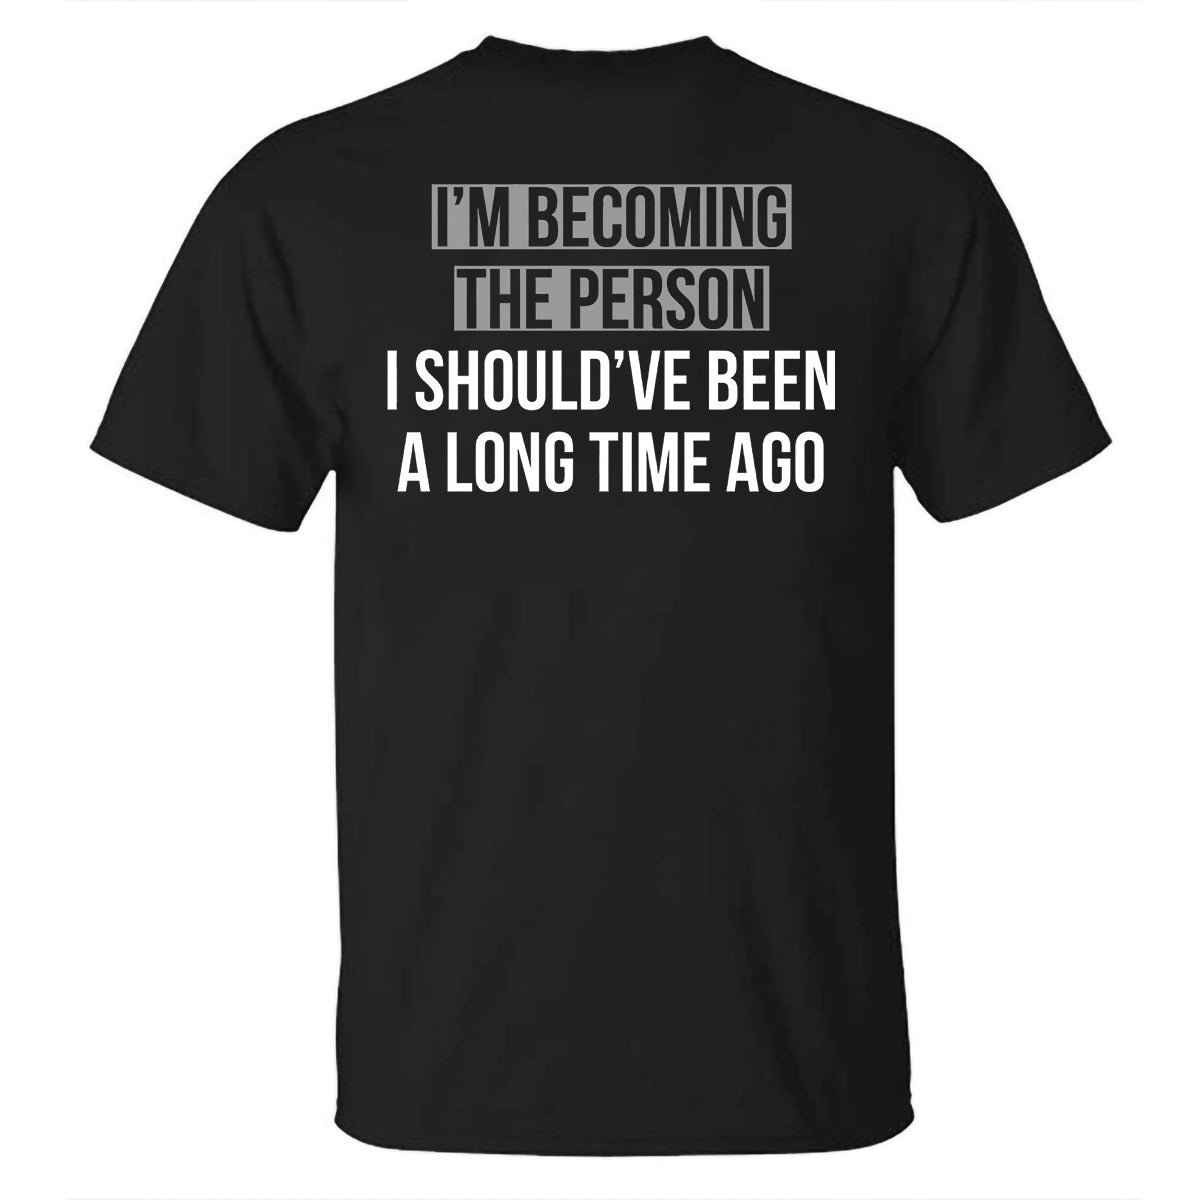 I'm Becoming The Person I Should've Been A Long Time Ago Printed T-shirt